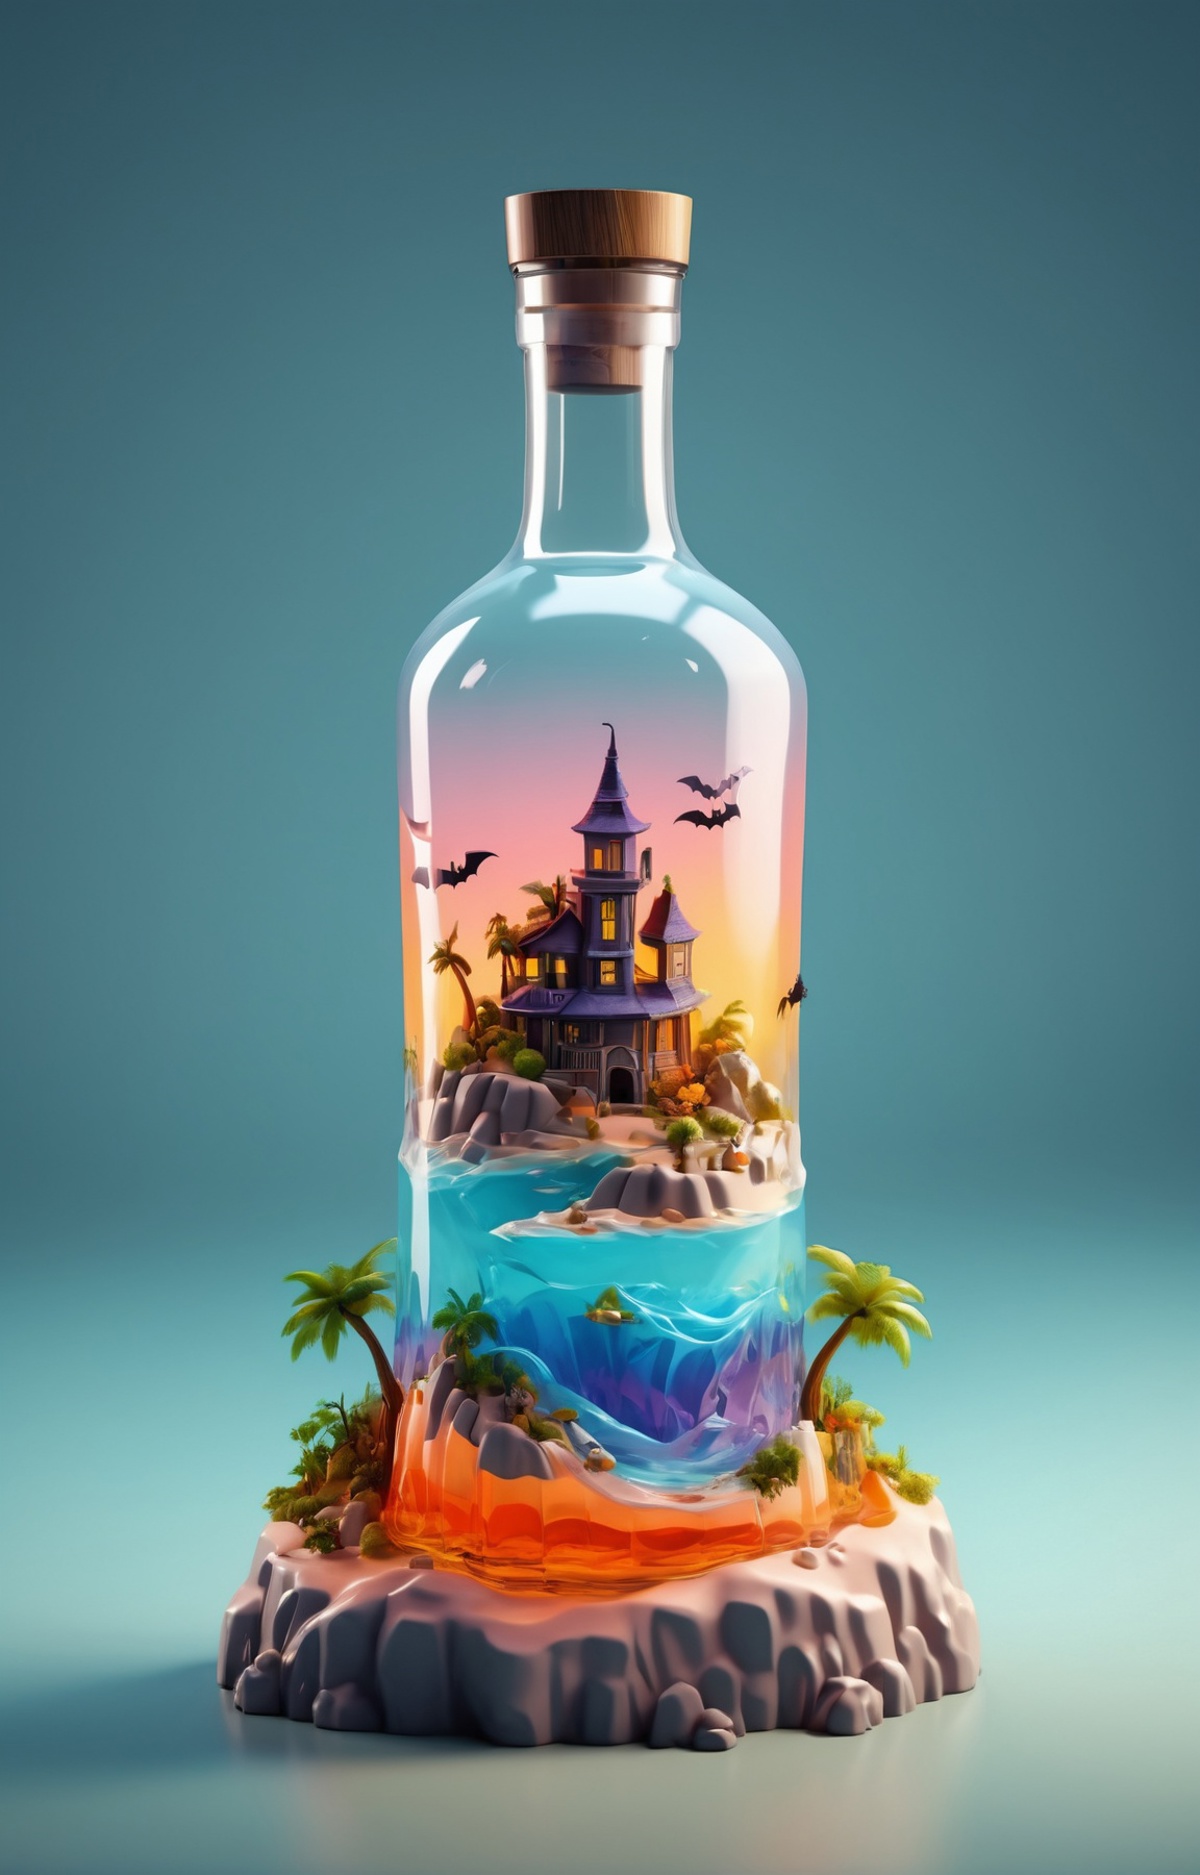 Artistic Bottle of Liquor with Scary House and Palm Trees